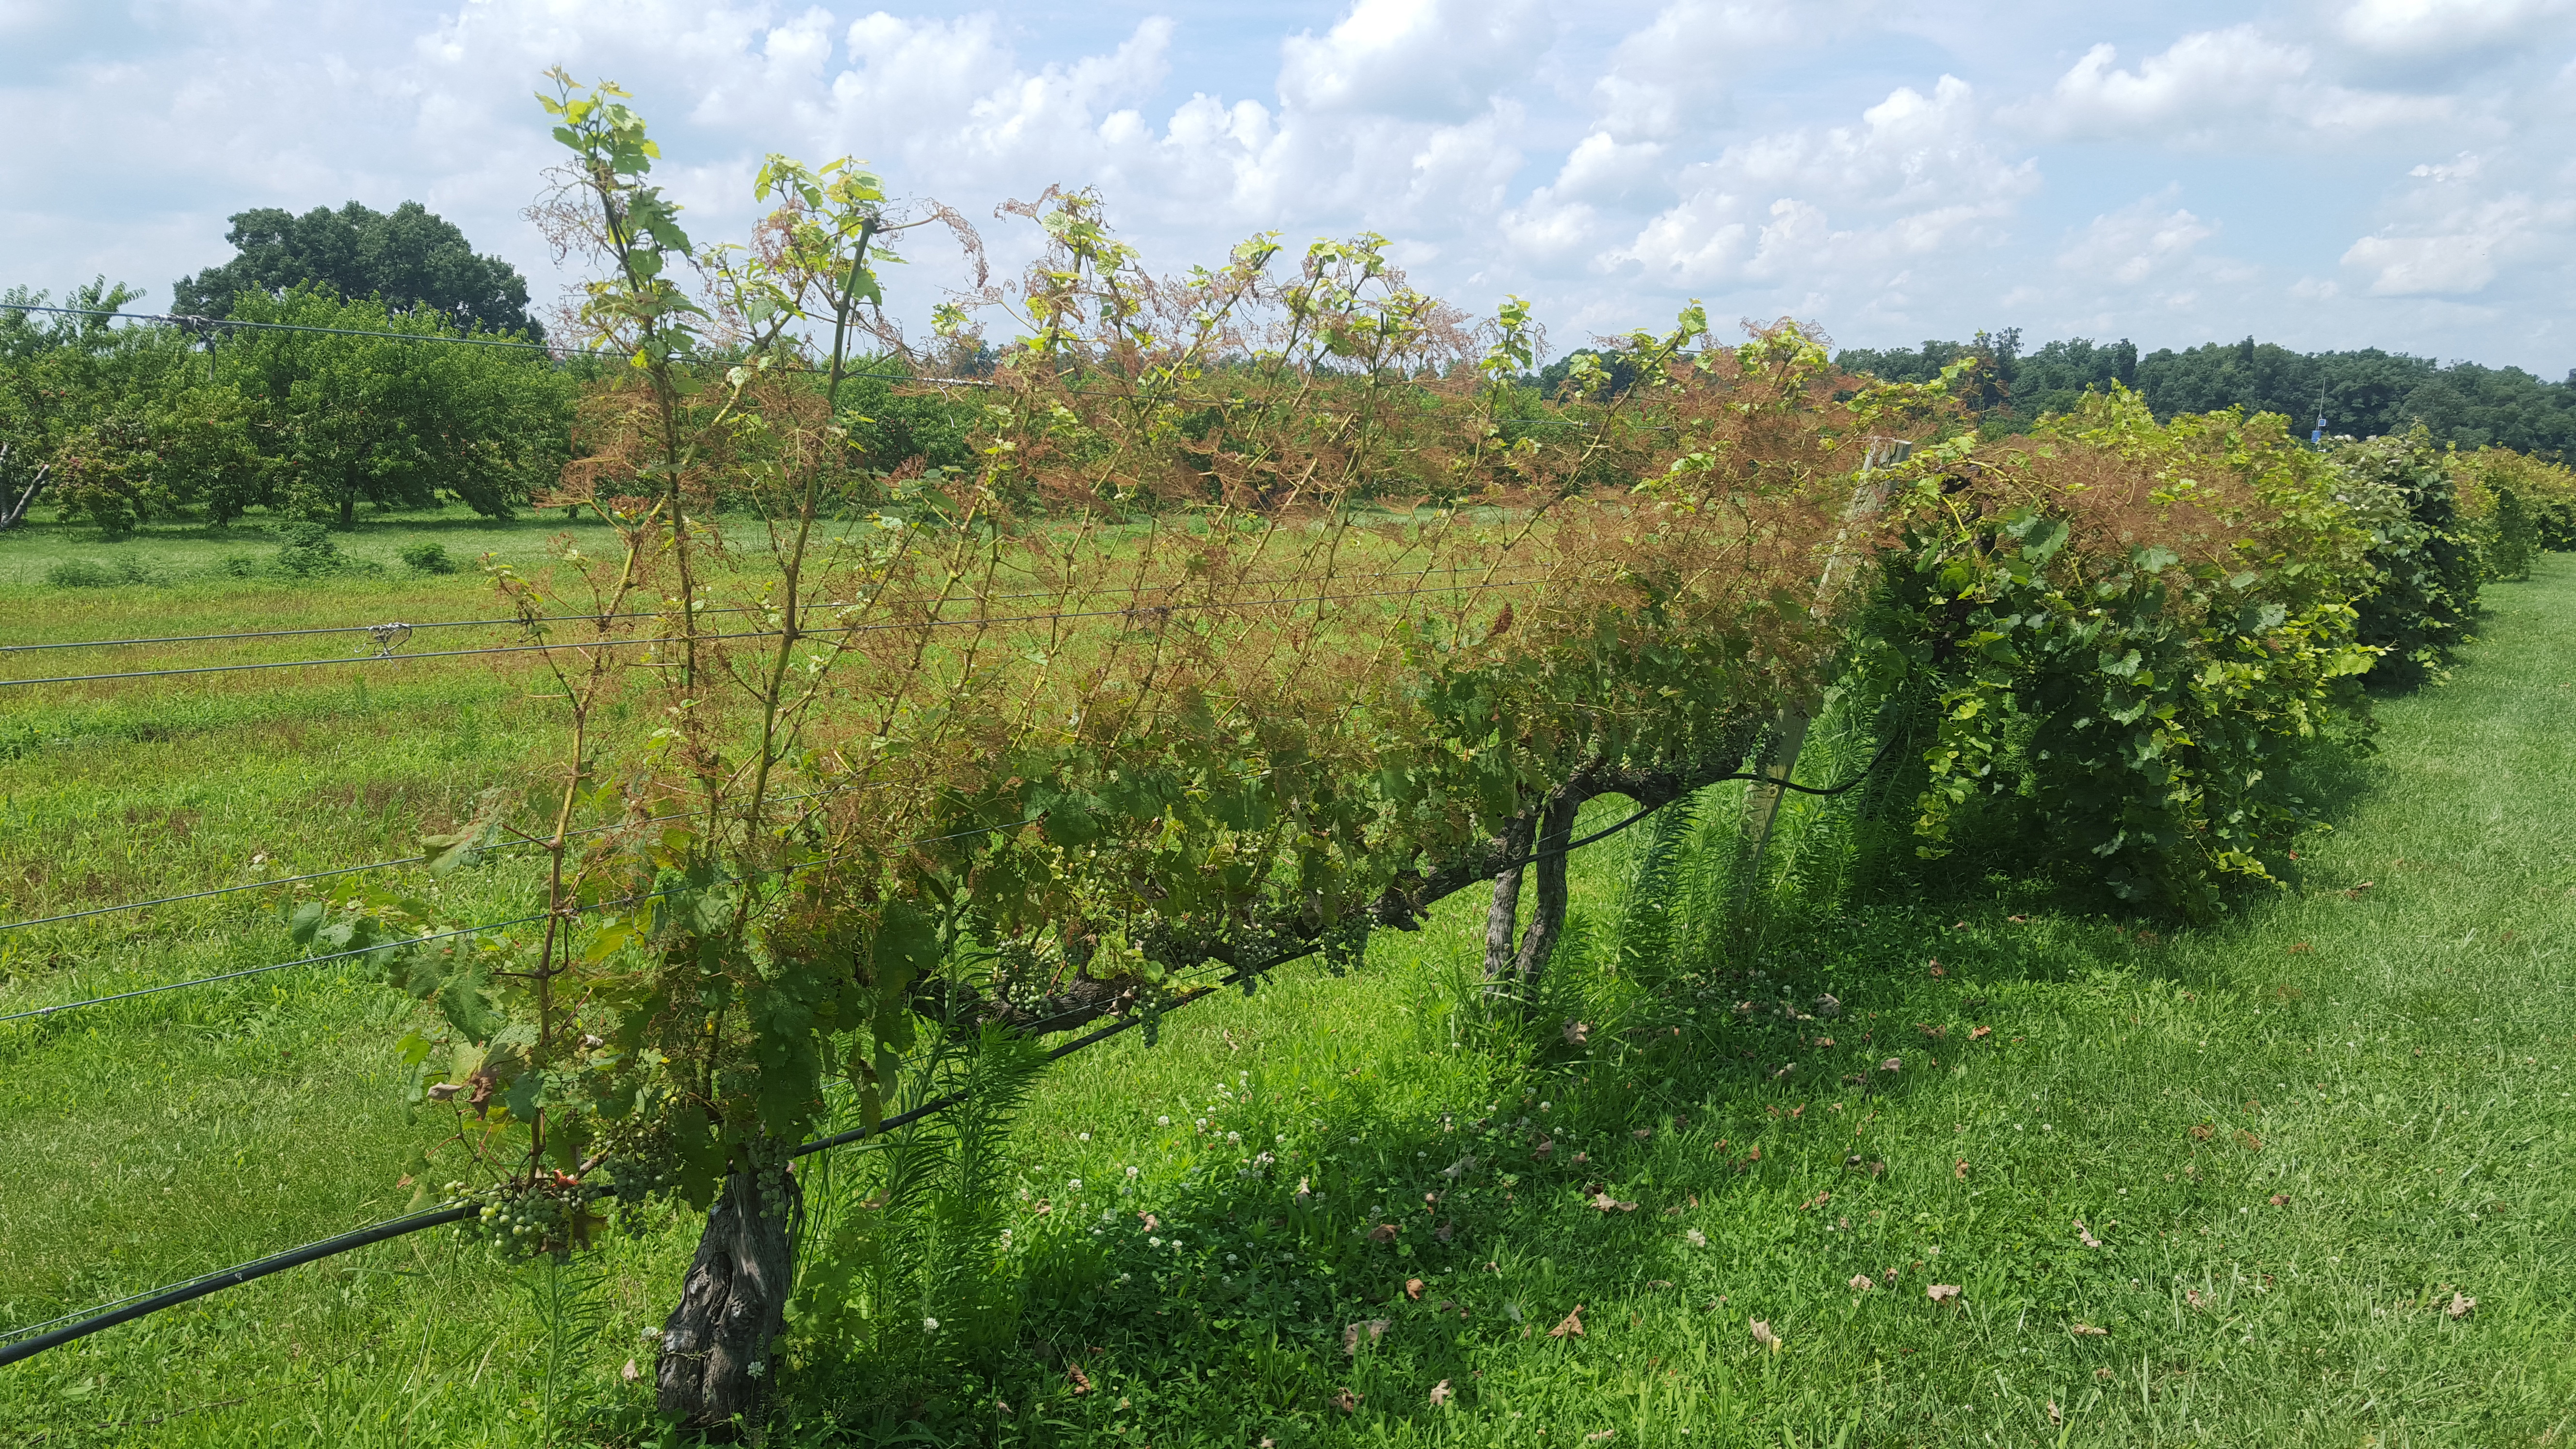 Grape cultivars vary in attractiveness to Japanese beetle; note the difference in grapevines in the foreground compared to those in background.  